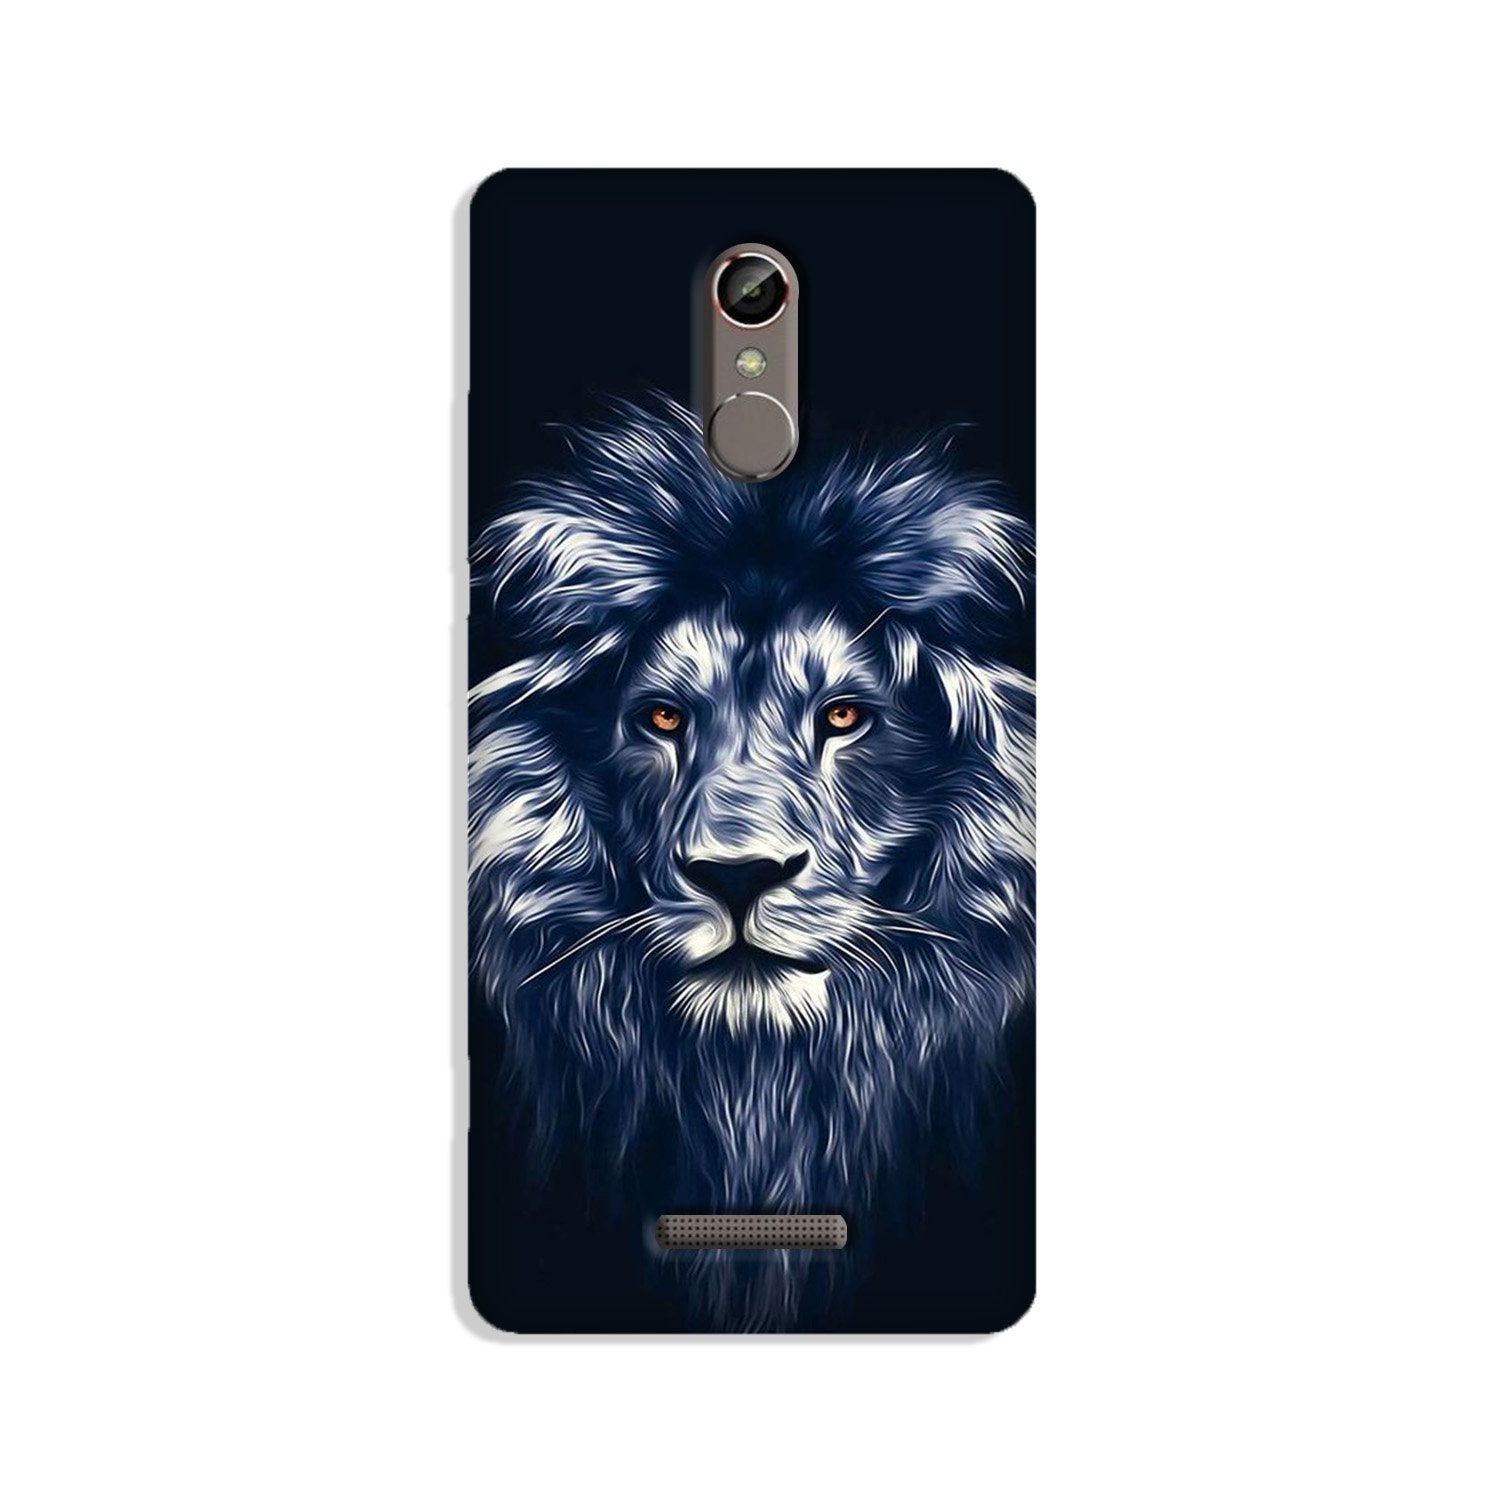 Lion Case for Gionee S6s (Design No. 281)